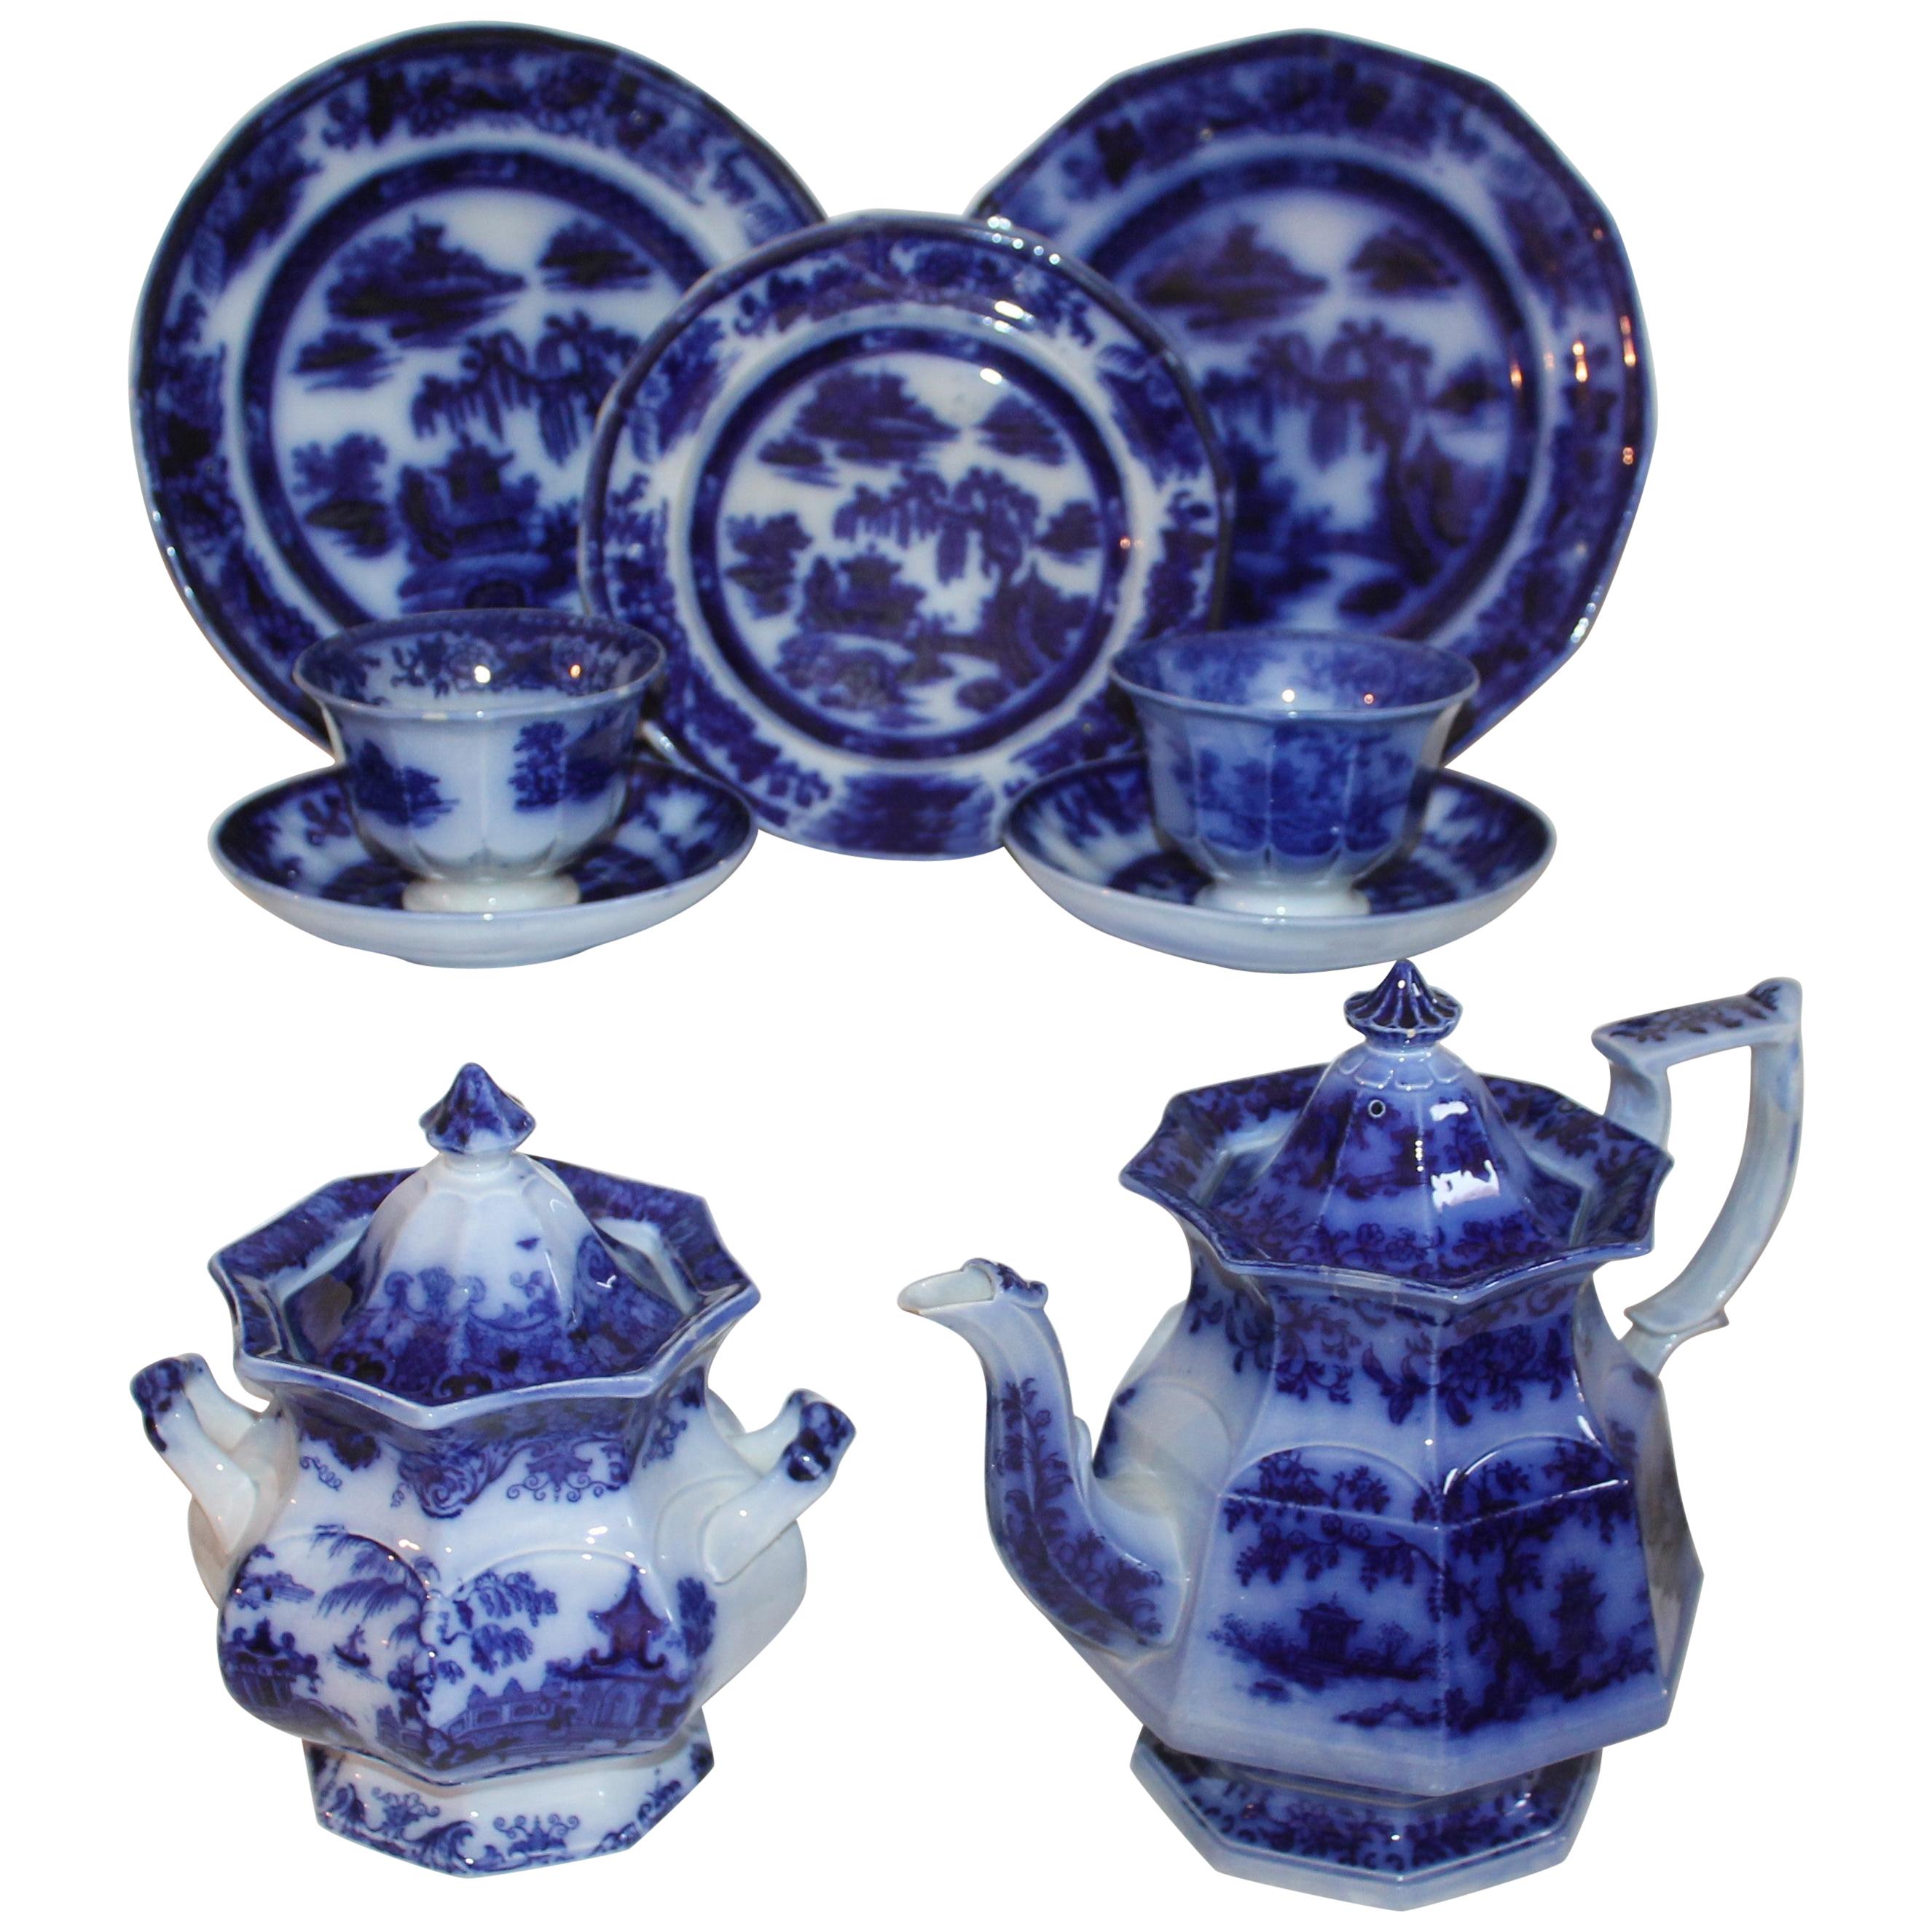 Flo-Blue Collection of 9 Piece Matching "Formosa" Tea Set For Sale